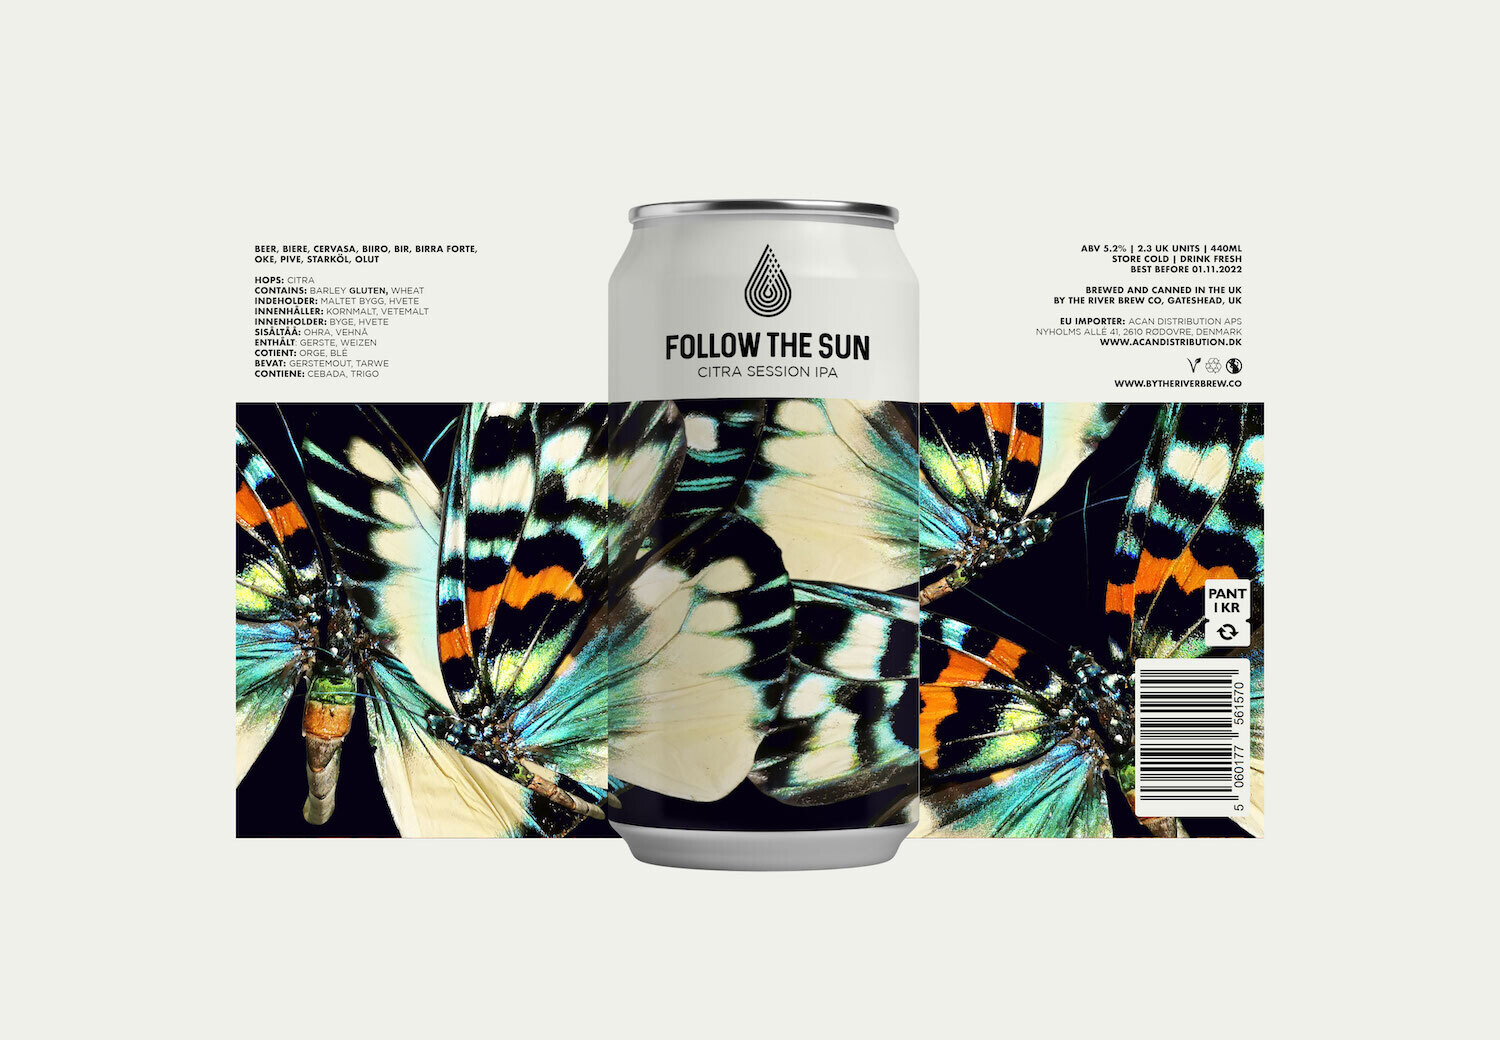 Follow The Sun | Citra Session IPA | By The River Brew Co. | ABV 5.2%